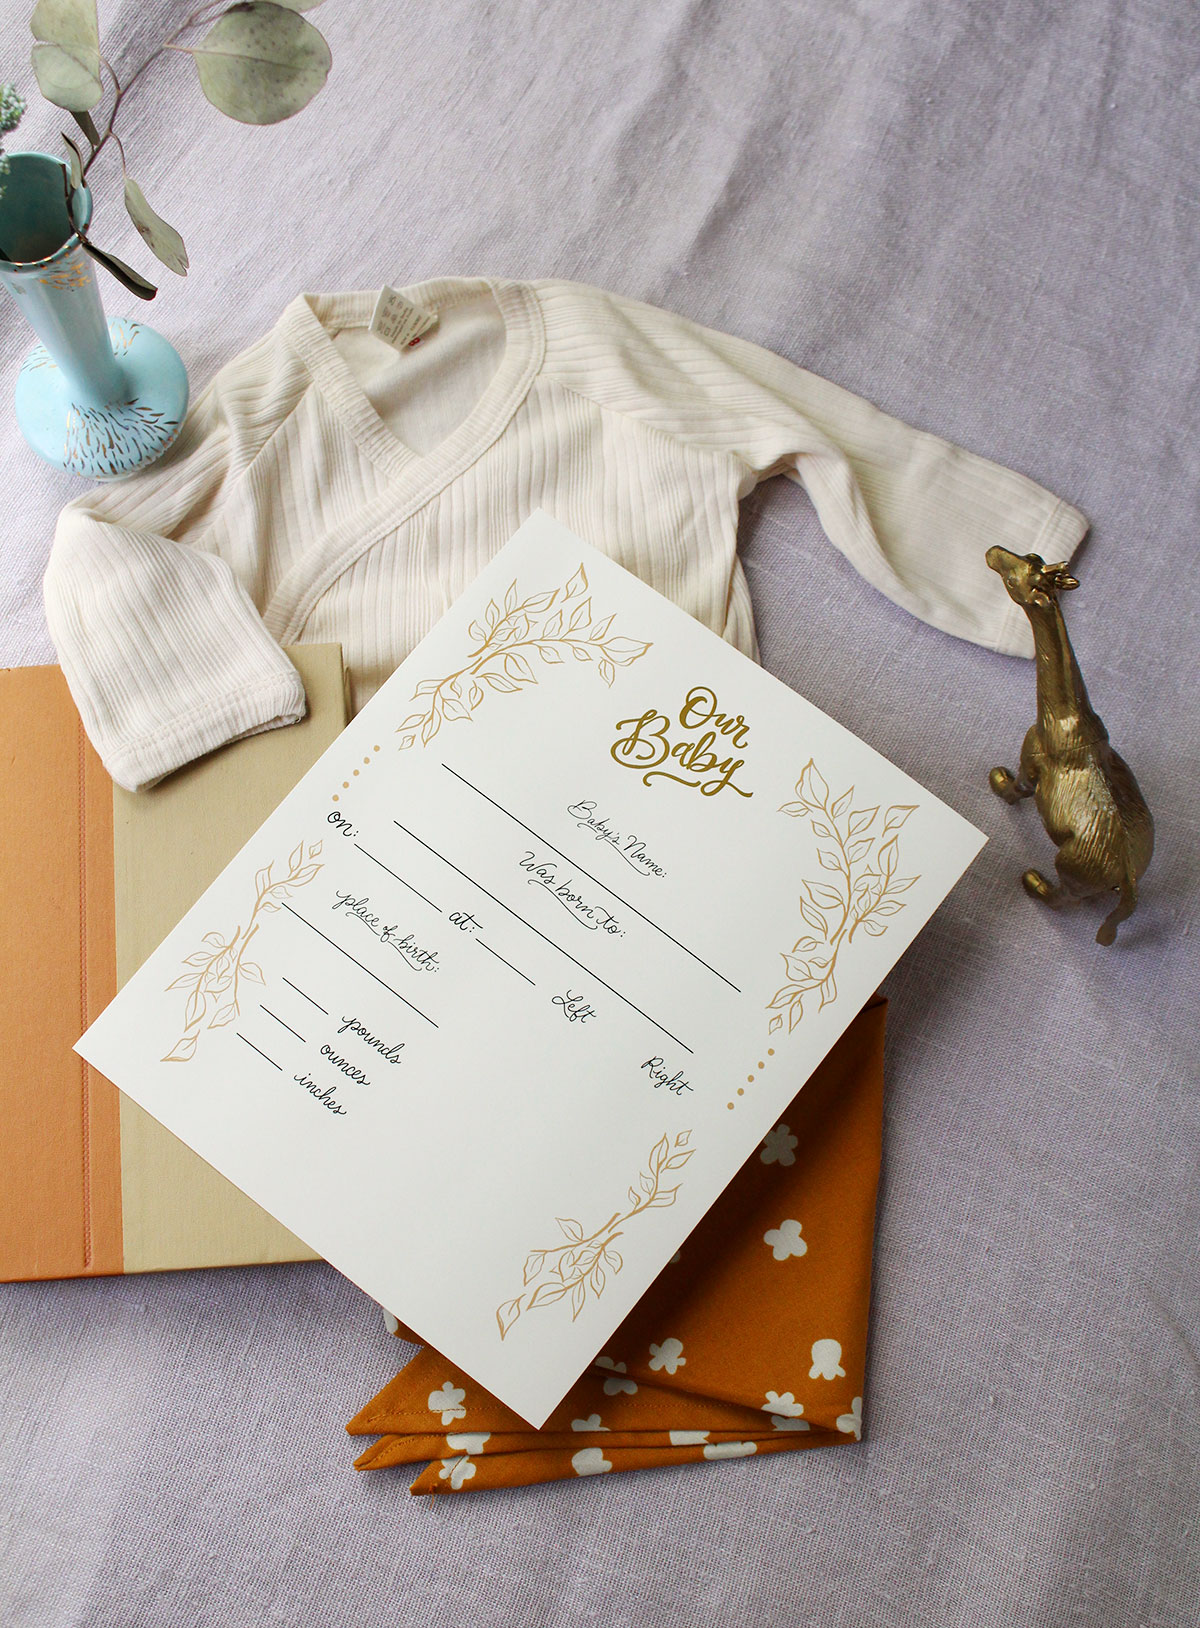 Fill in the blank birth stat prints are a cute way to create a custom piece of nursery art and a family heirloom 